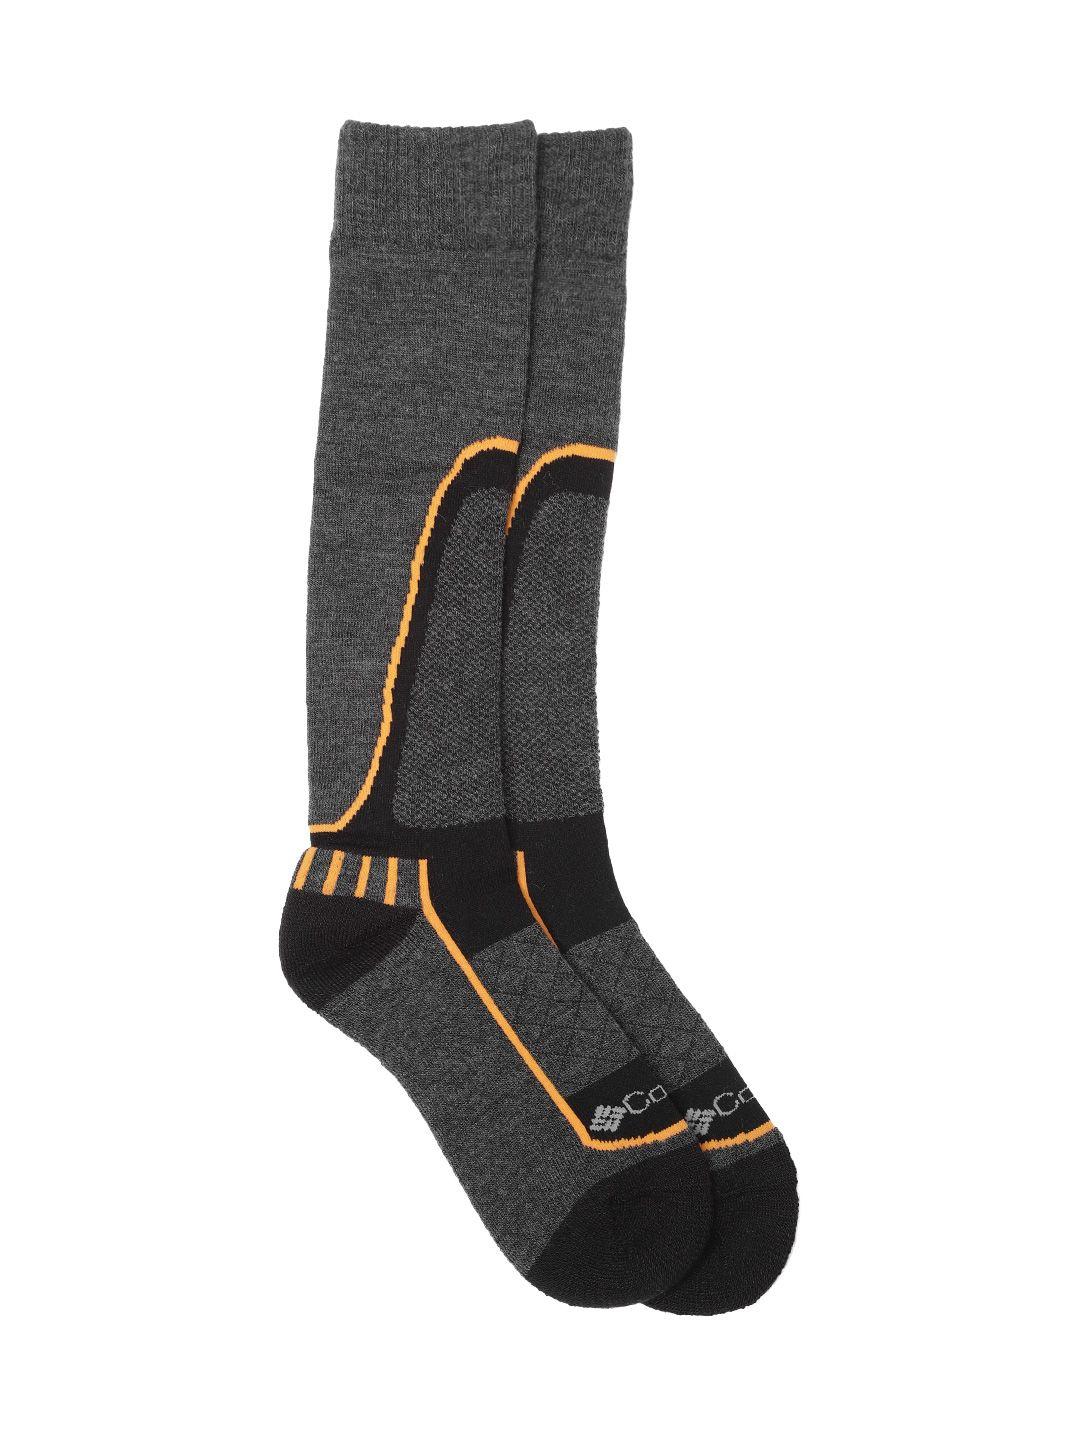 columbia unisex charcoal grey patterned ankle length socks